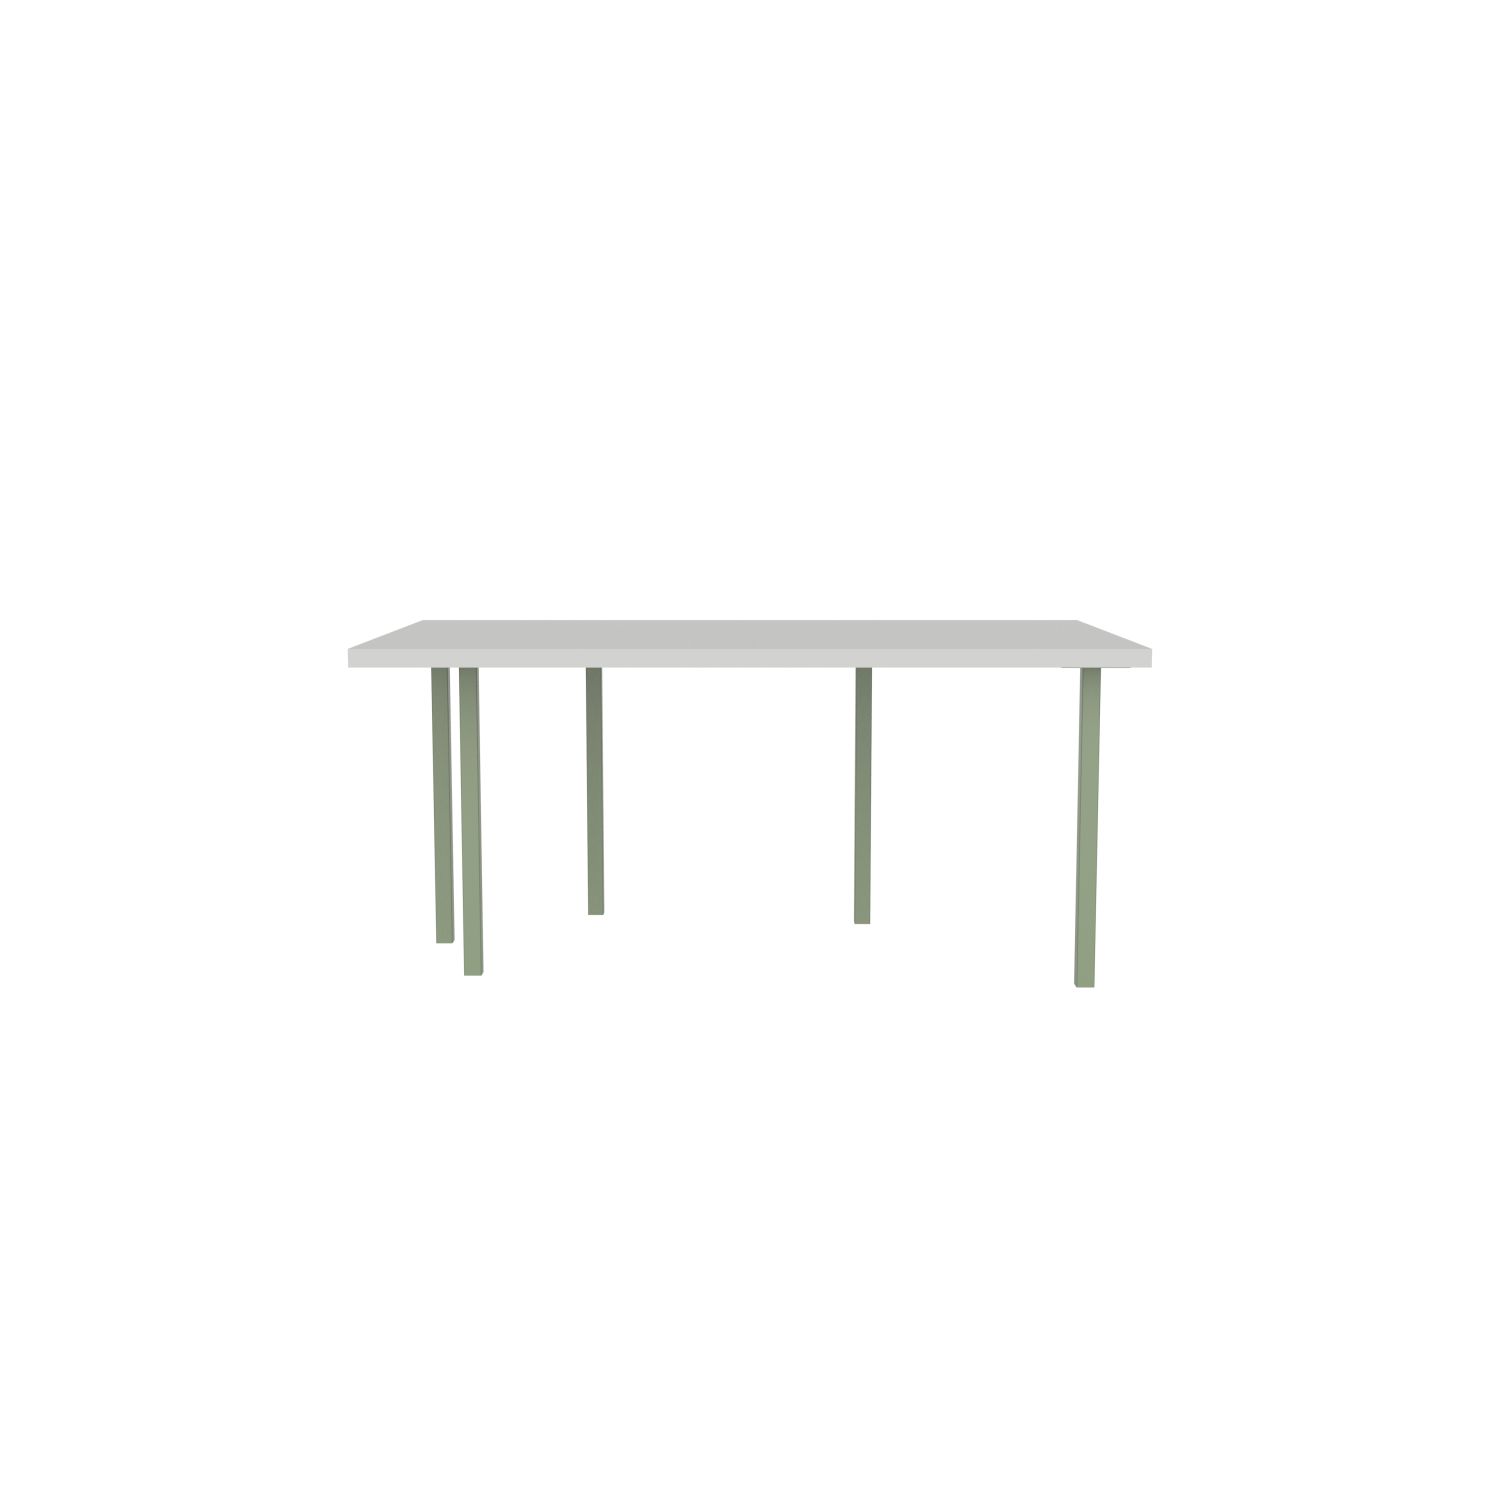 lensvelt bbrand table five fixed heigt 103x172 hpl boring grey 50 mm price level 1 green ral6021